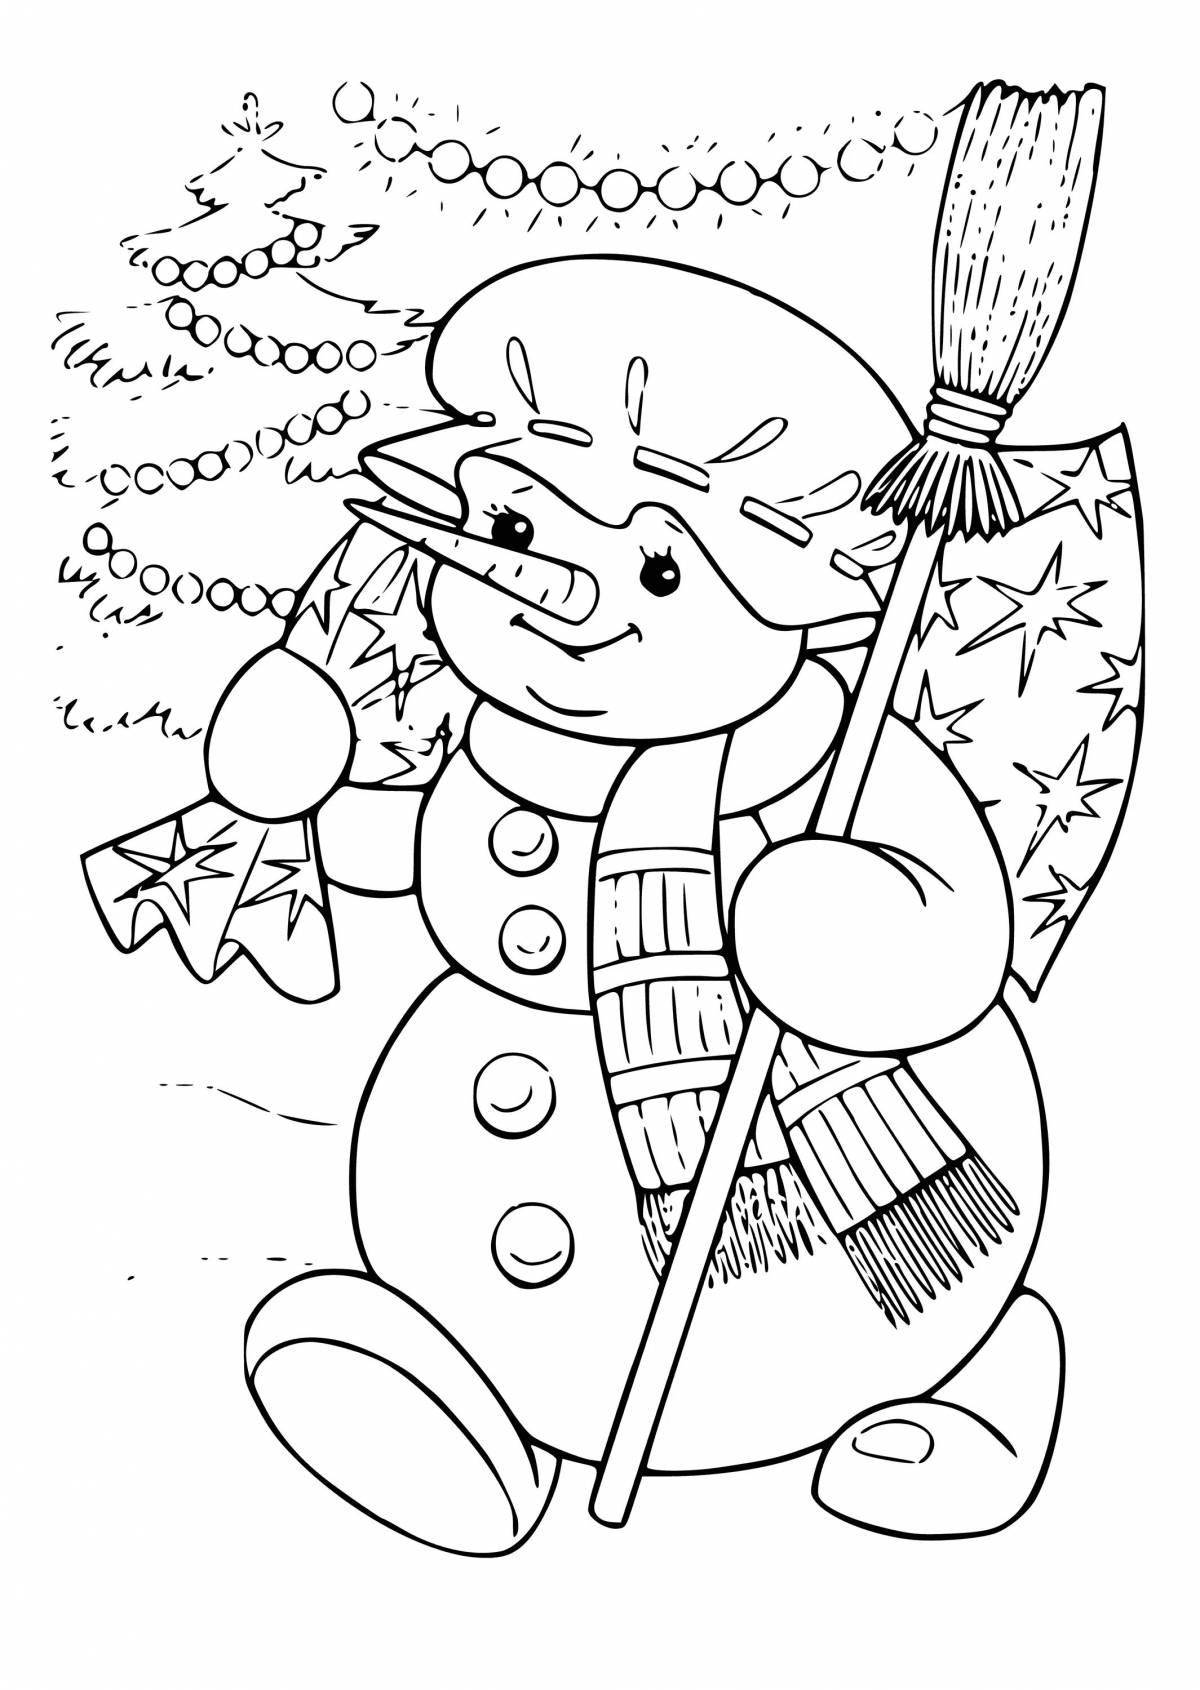 A fascinating Christmas coloring book snowman